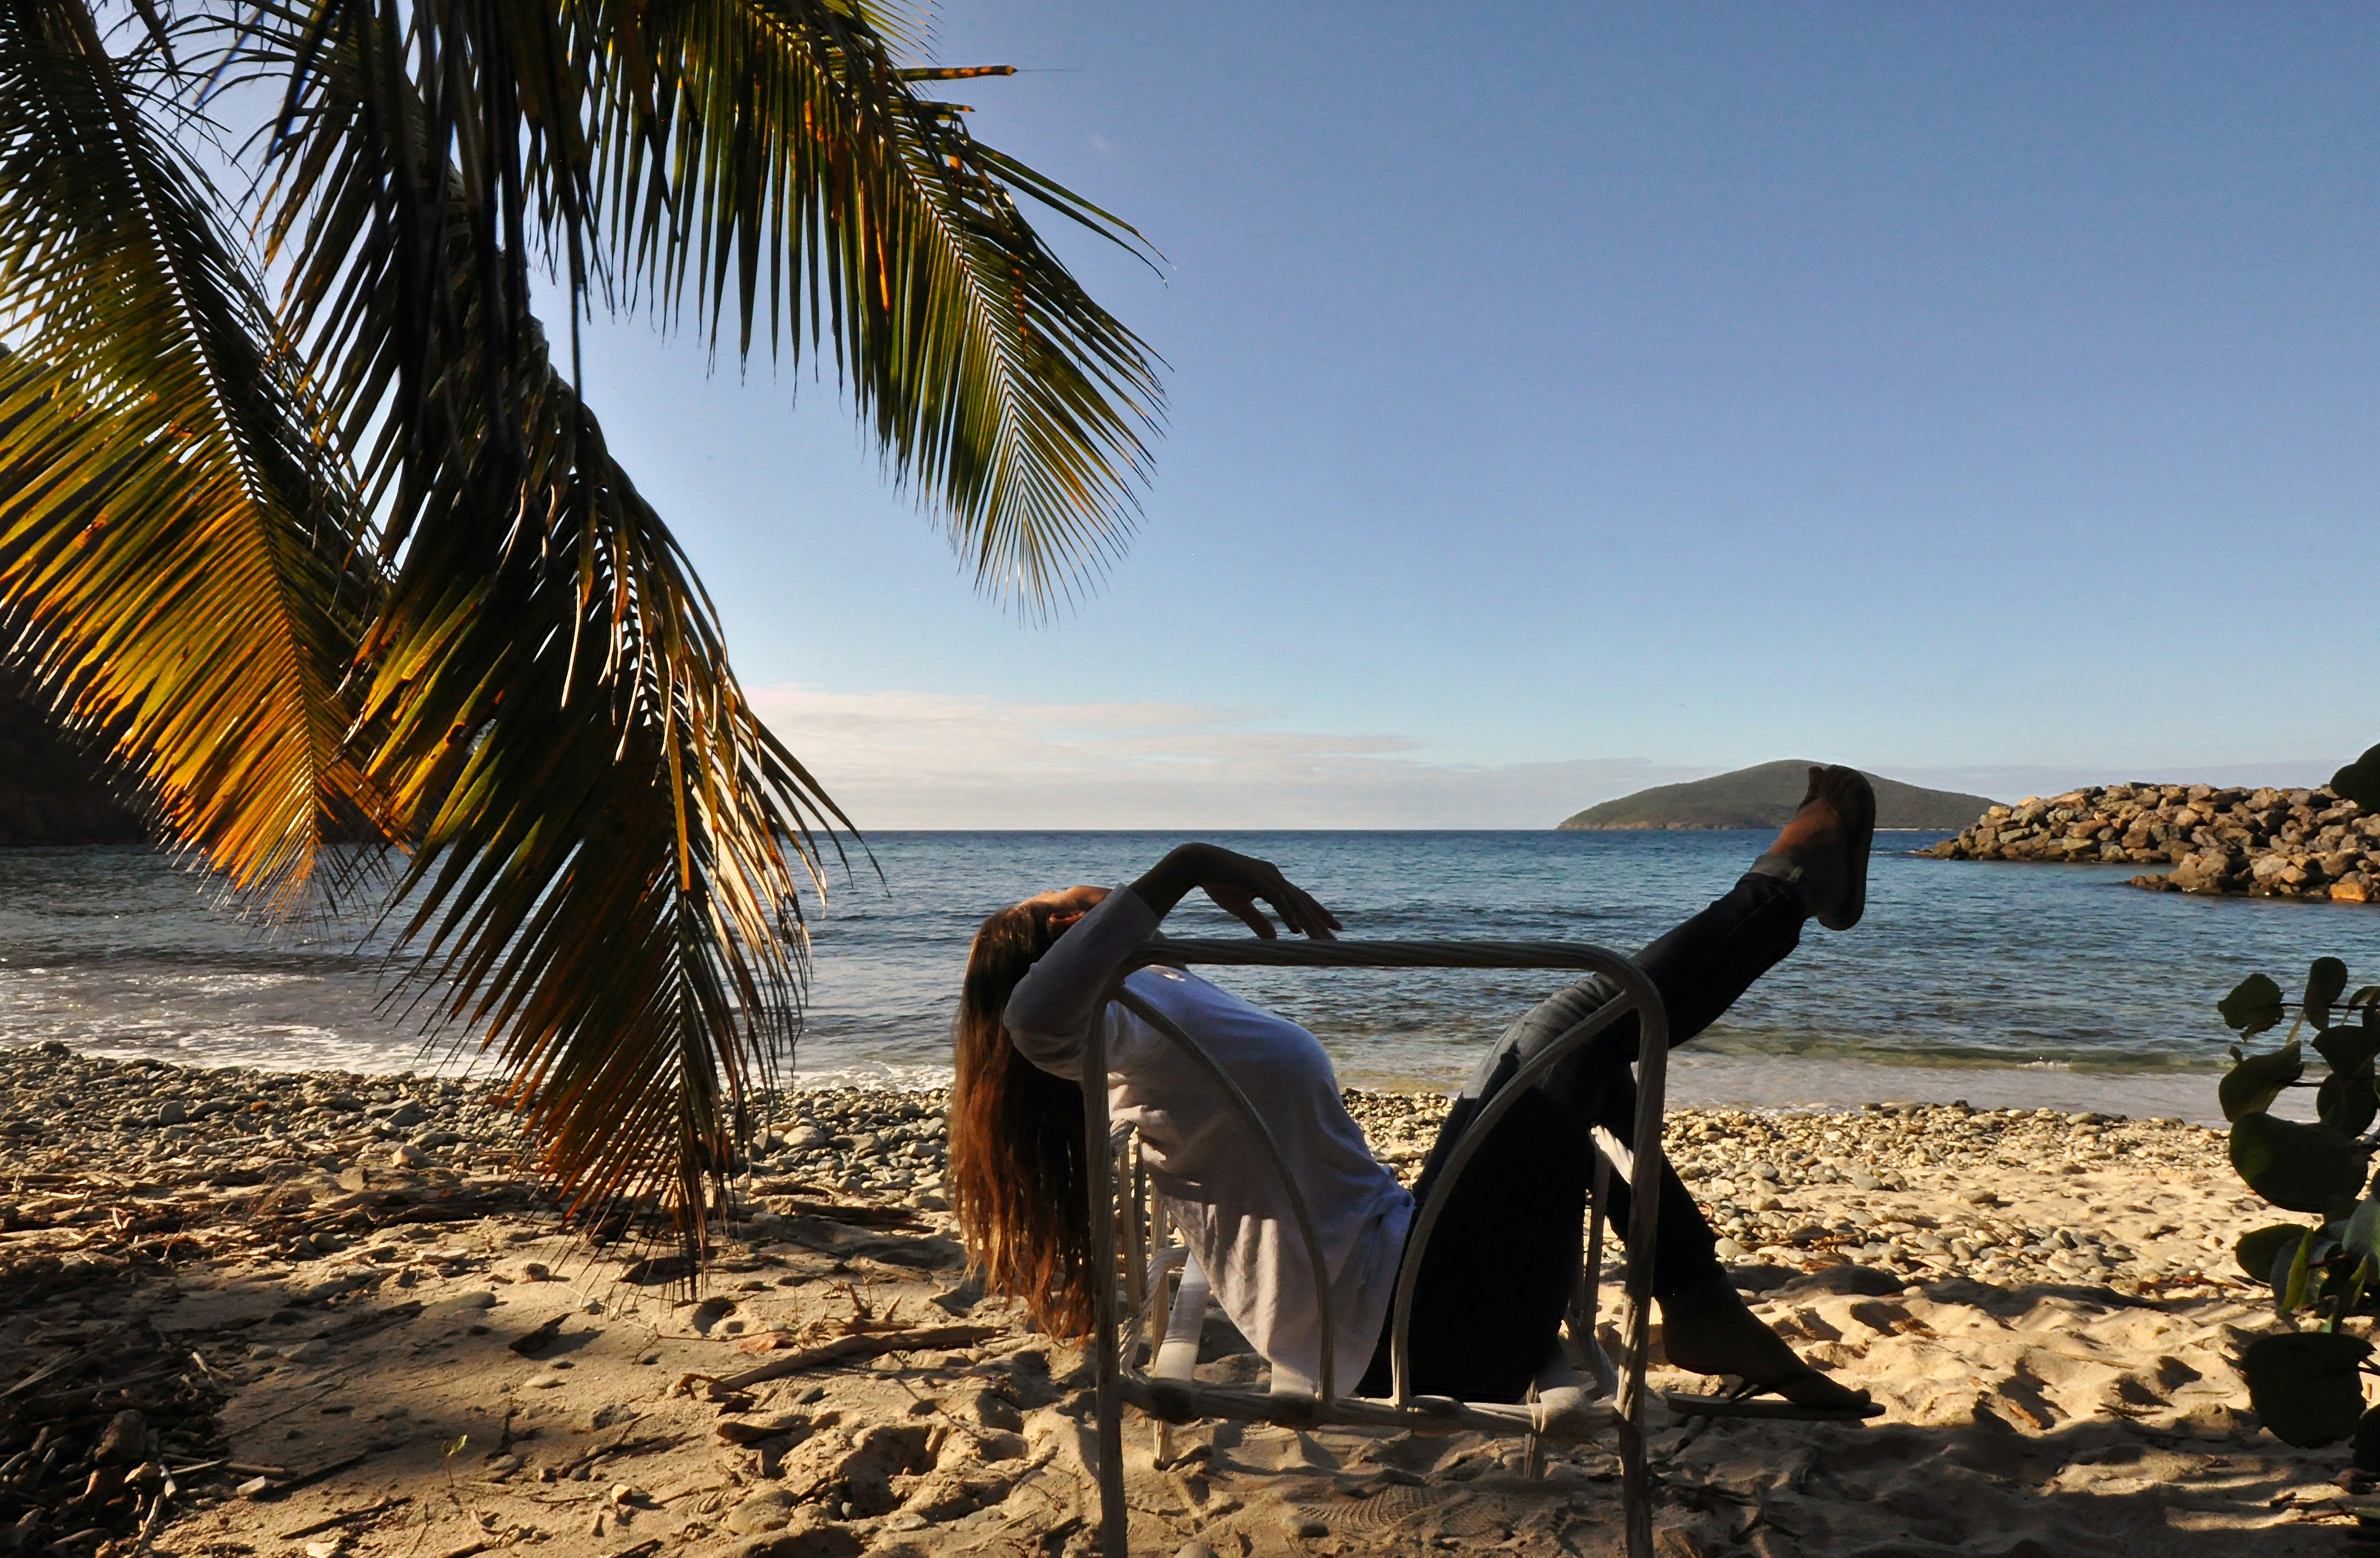 A woman reclines on a beach chair in the late afternoon shade with Atlantic Ocean and Han Lollick island on the horizon.